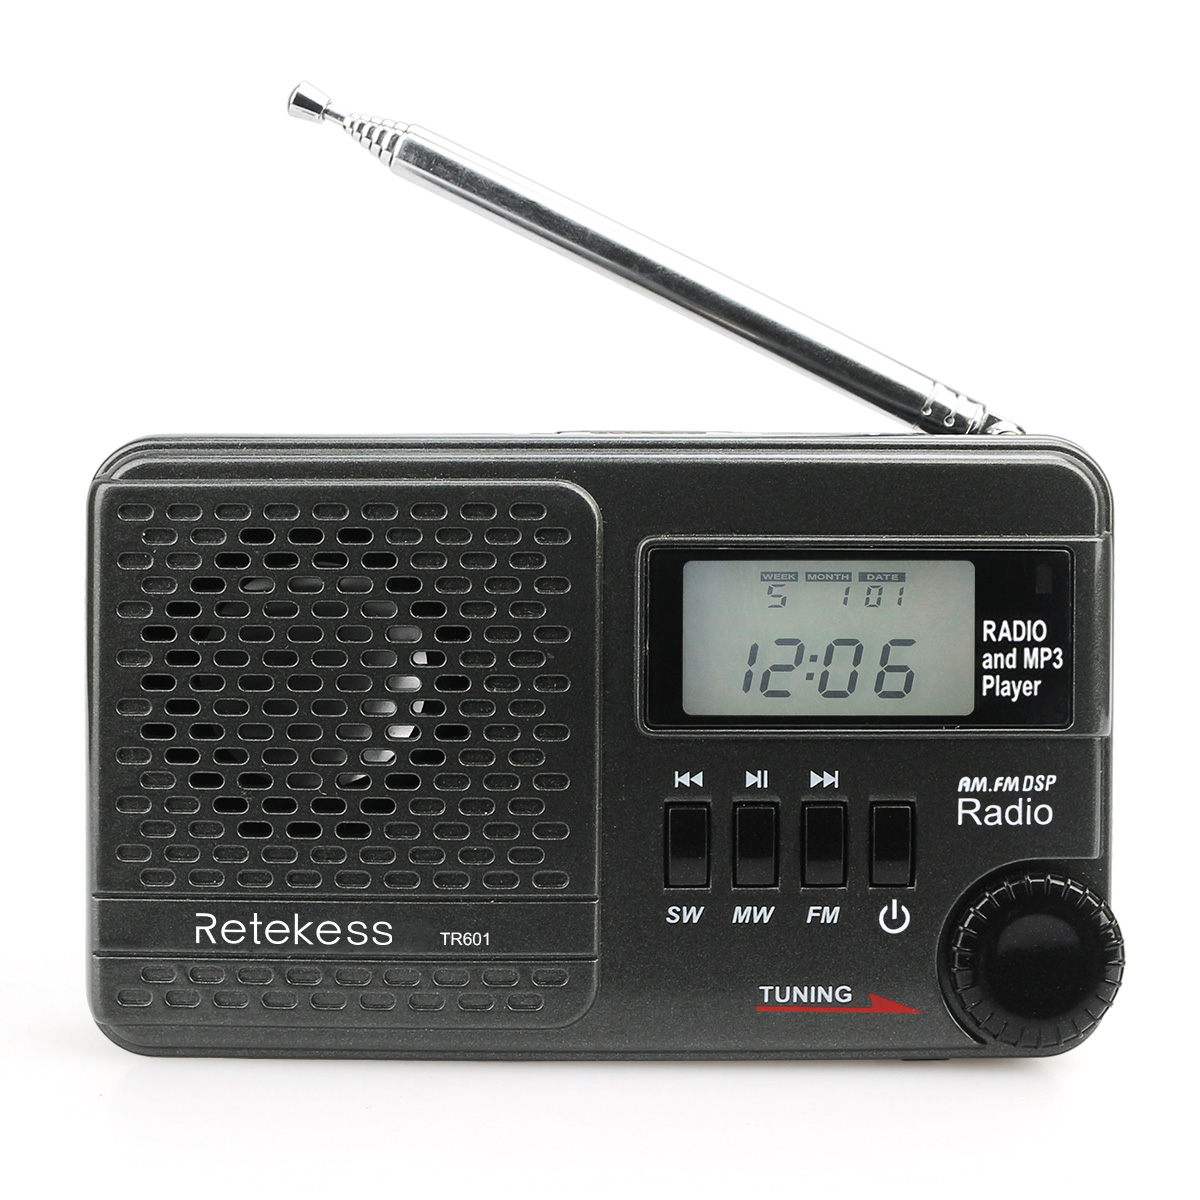 

Retekess F9216A TR601 Digital Display Radio with FM AM for Family Camping Outdoor